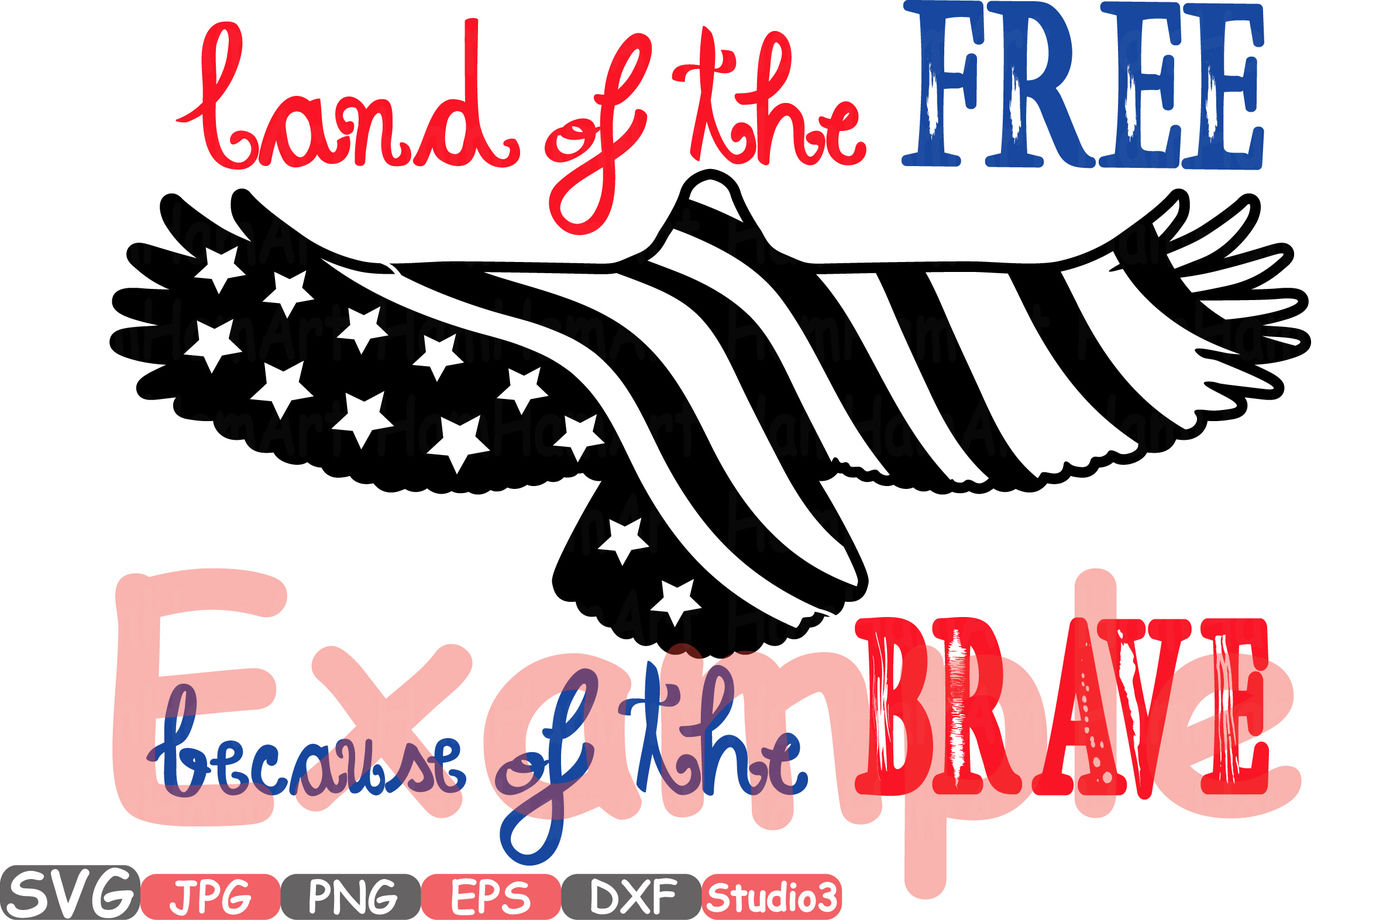 ori 82831 7ae0ff01ba7e0c6d034ae4800c06cbc8fb17e218 land of the free because of the brave quote silhouette svg independence studio3 american flag eagle flag eagles clipart 4th of july 497s